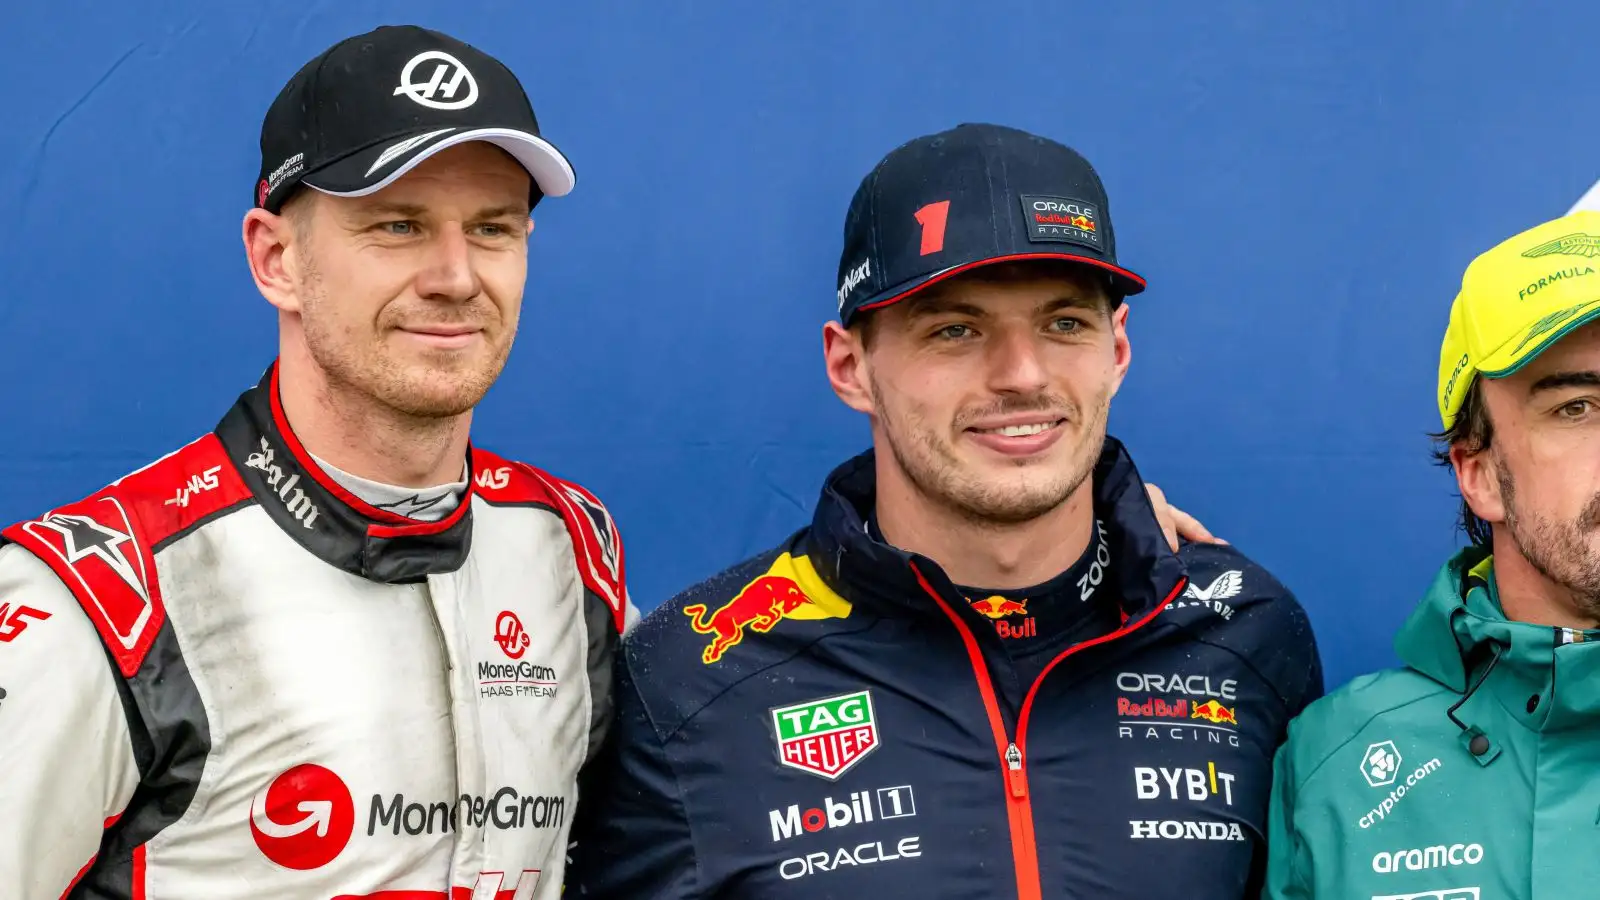 Nico Hulkenberg (Haas) and Max Verstappen (Red Bull) pose after qualifying in the top three for the Canadian Grand Prix. Montreal, June 2023.